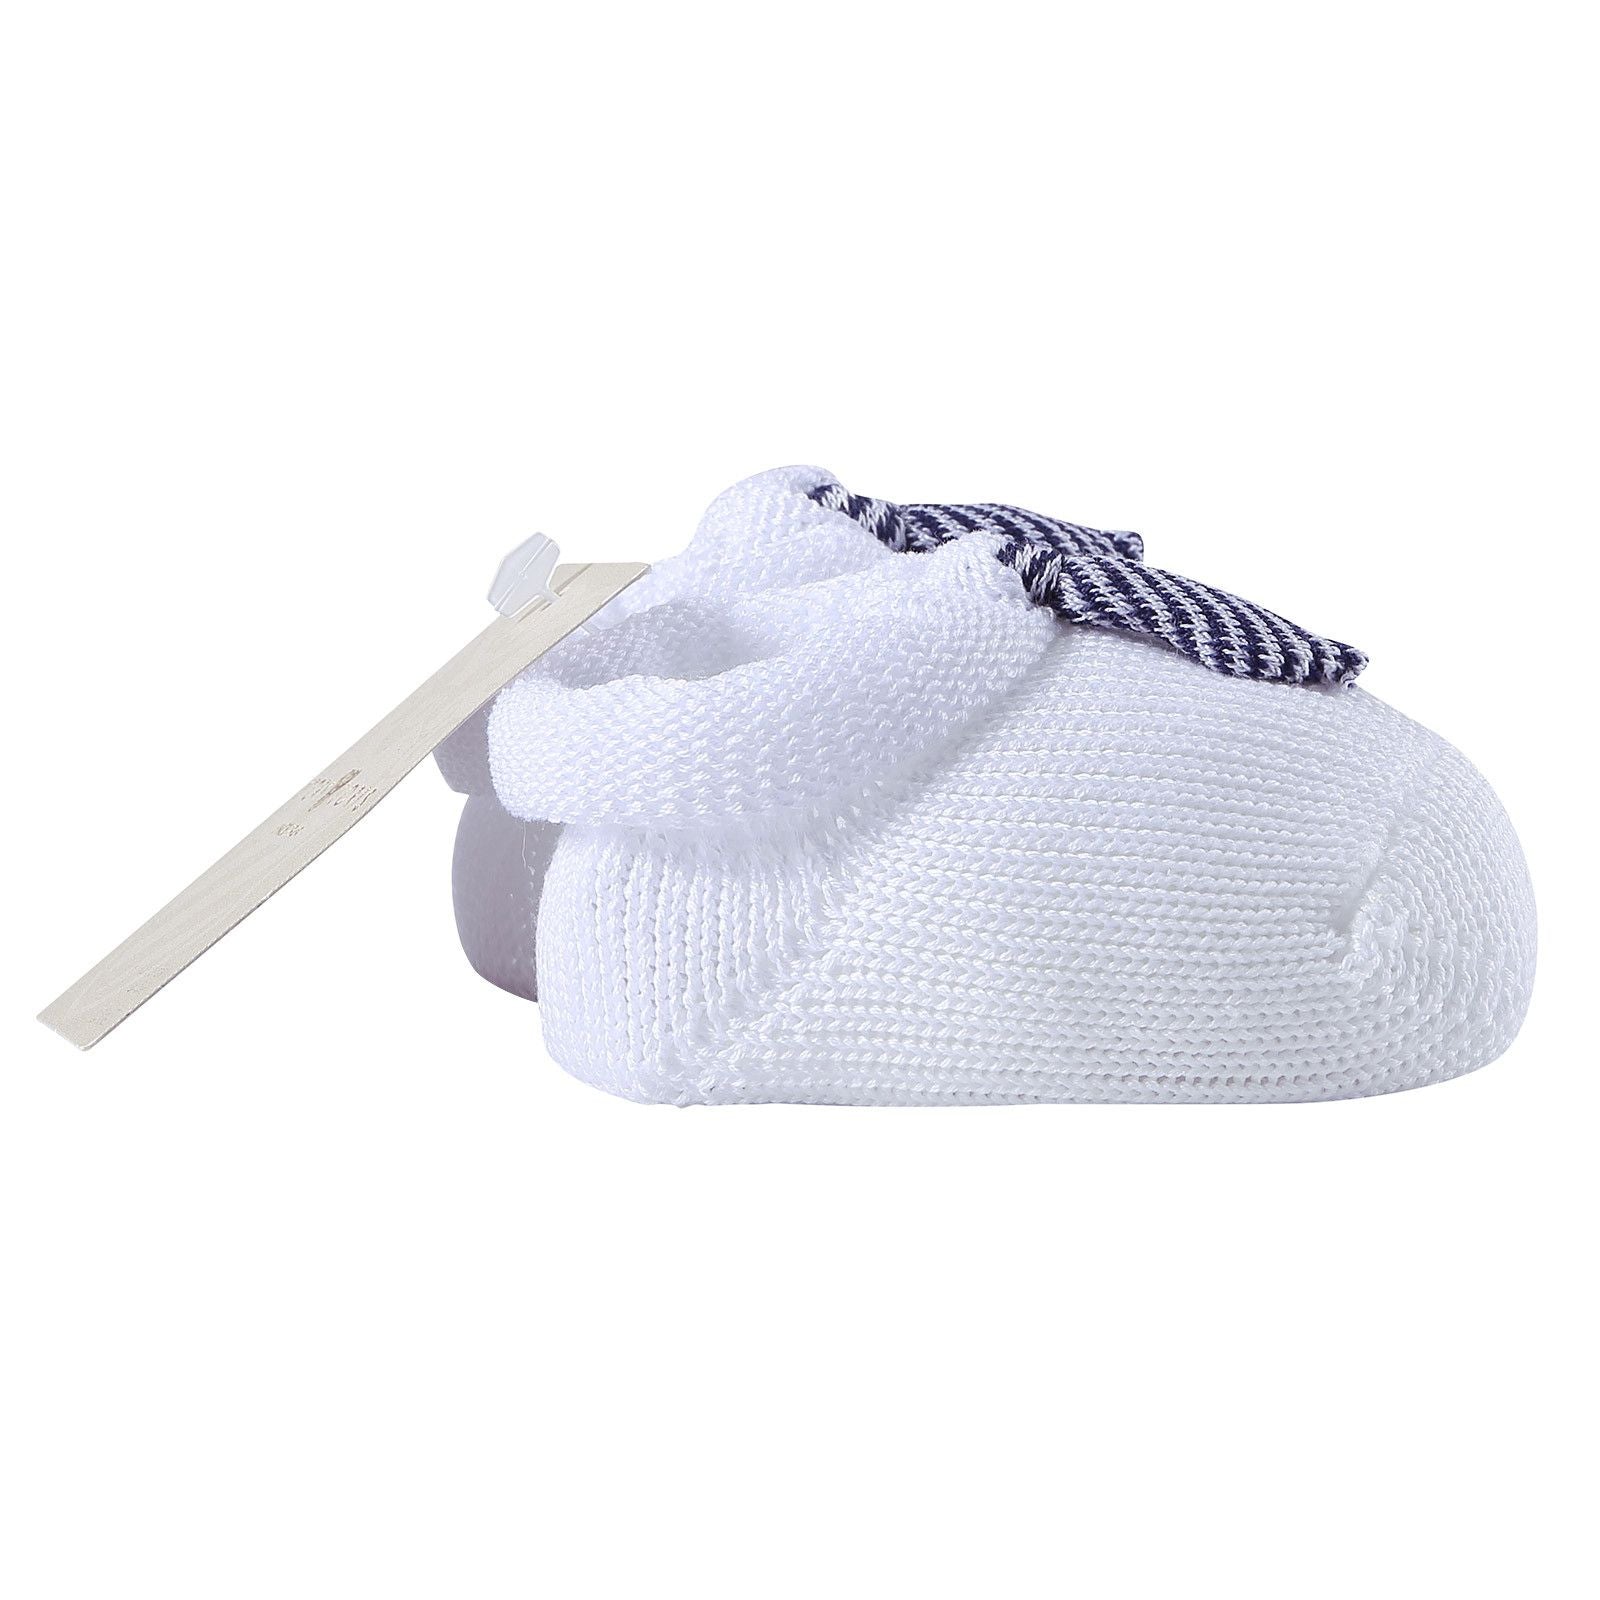 Baby White Knitted Cotton Shoes With Blue Tie Trims - CÉMAROSE | Children's Fashion Store - 3